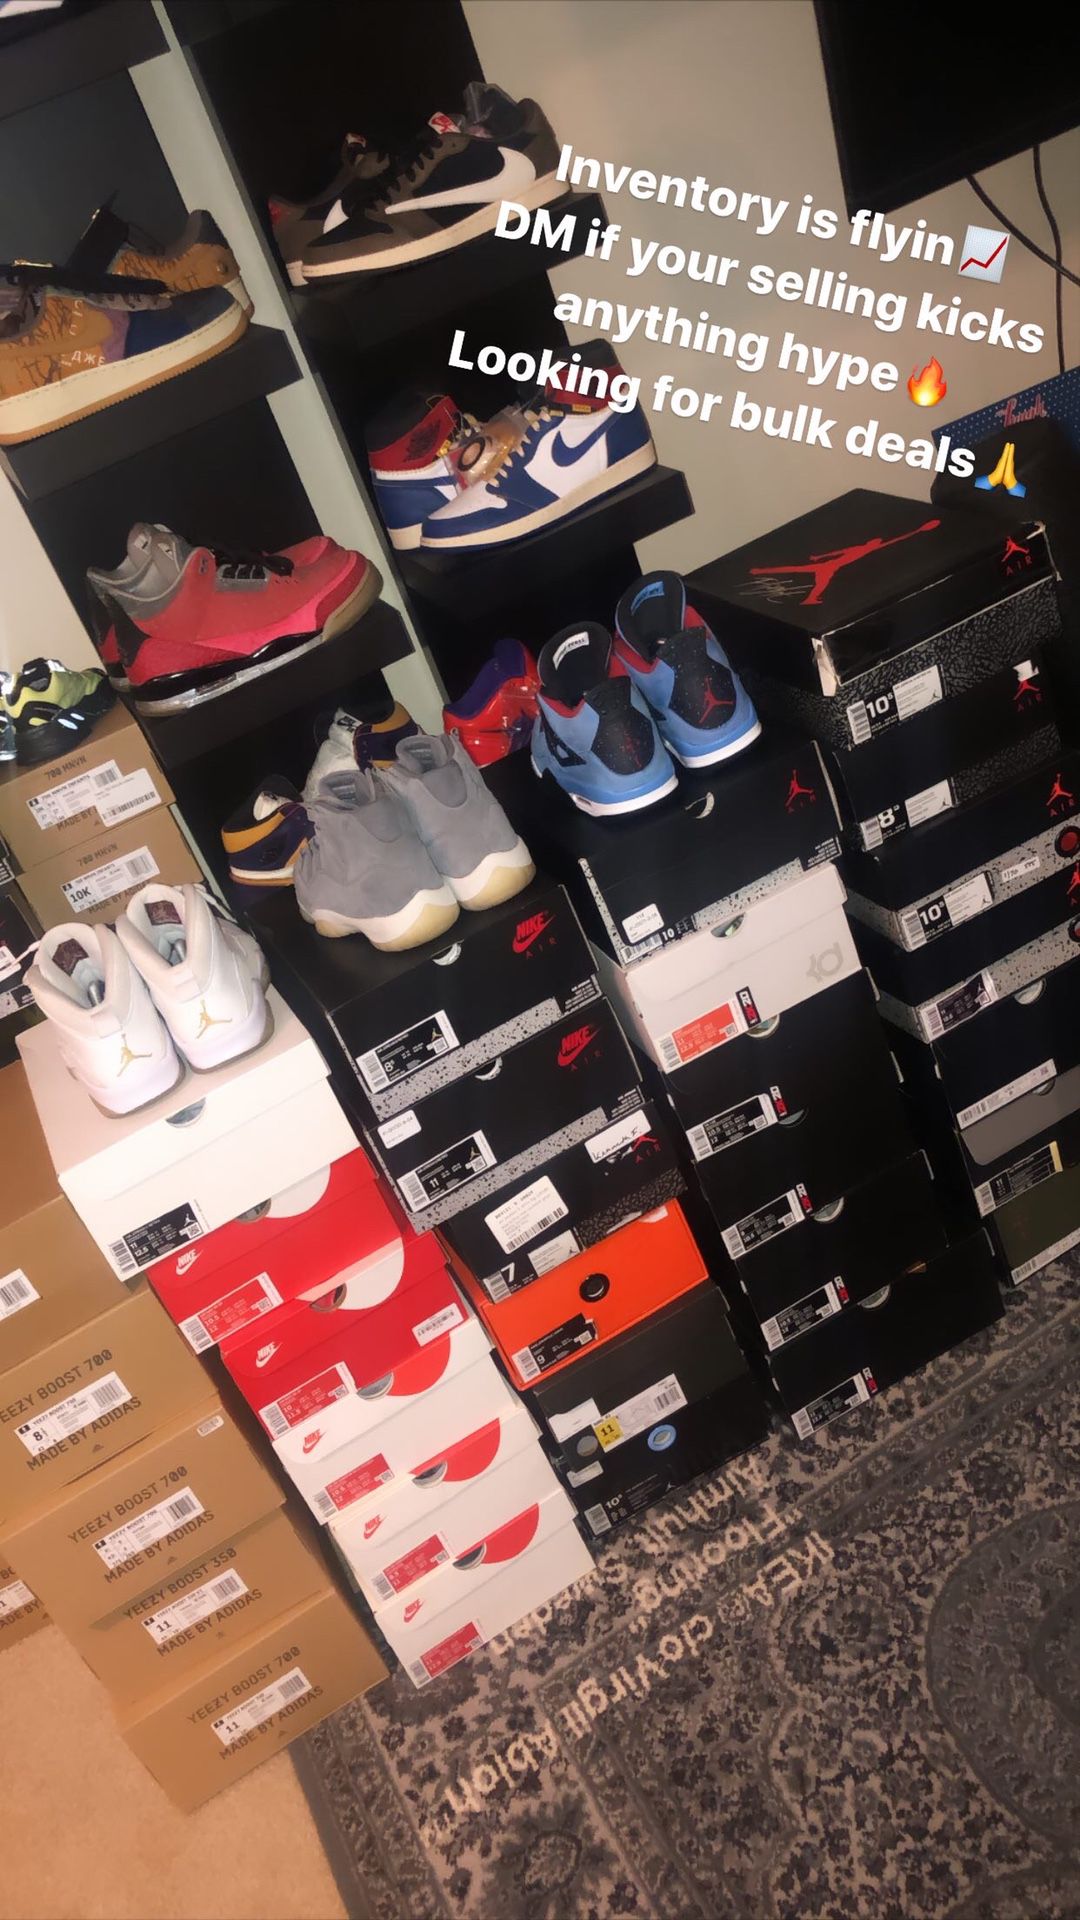 Looking to buy bulk deals any size anything hype🔥 Jordan’s Nike adidas Yeezy etc